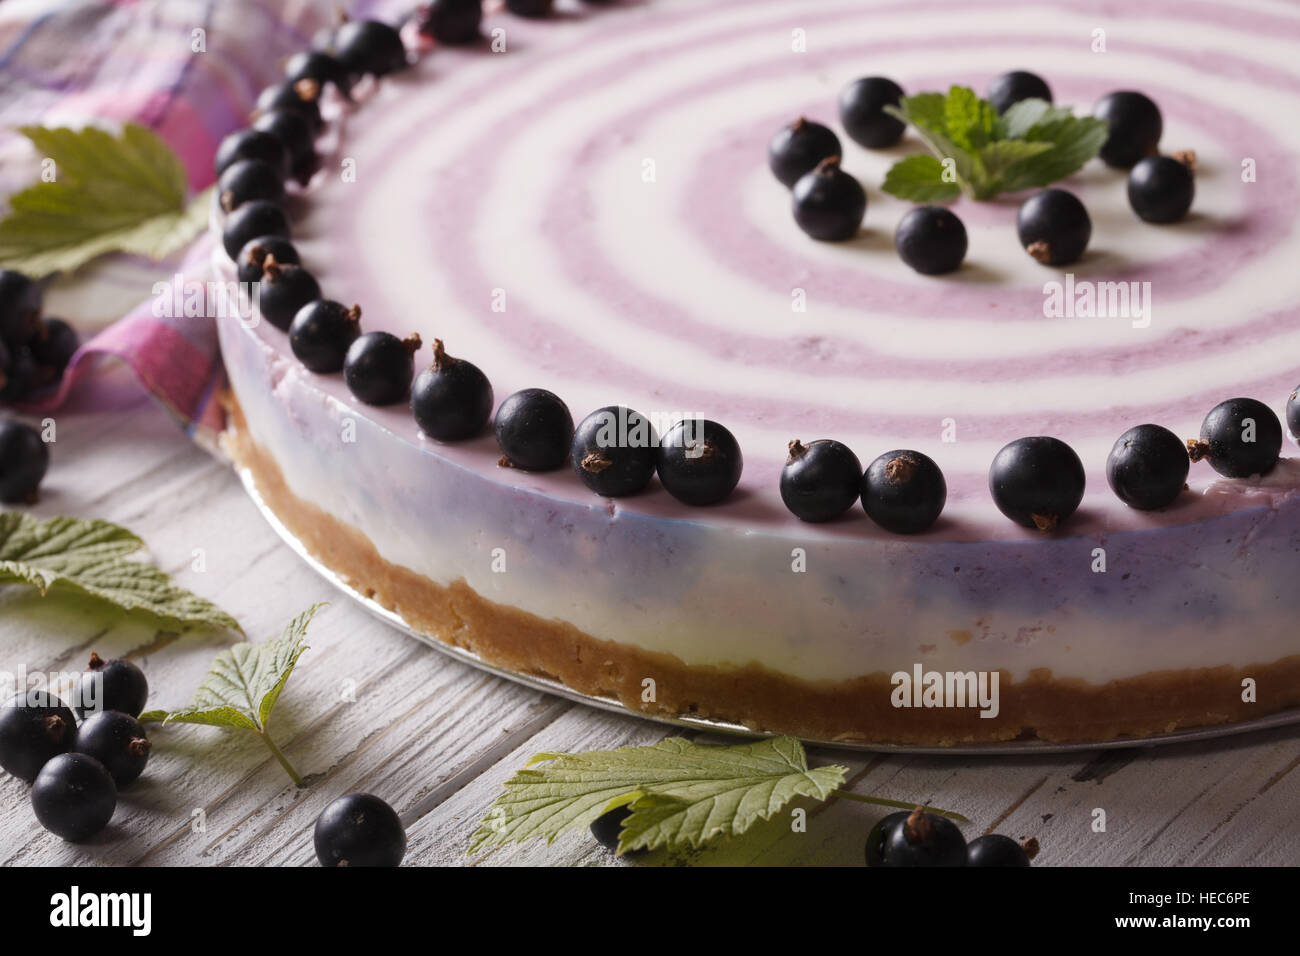 Delicious striped currant cheesecake close-up on a plate. horizontal Stock Photo